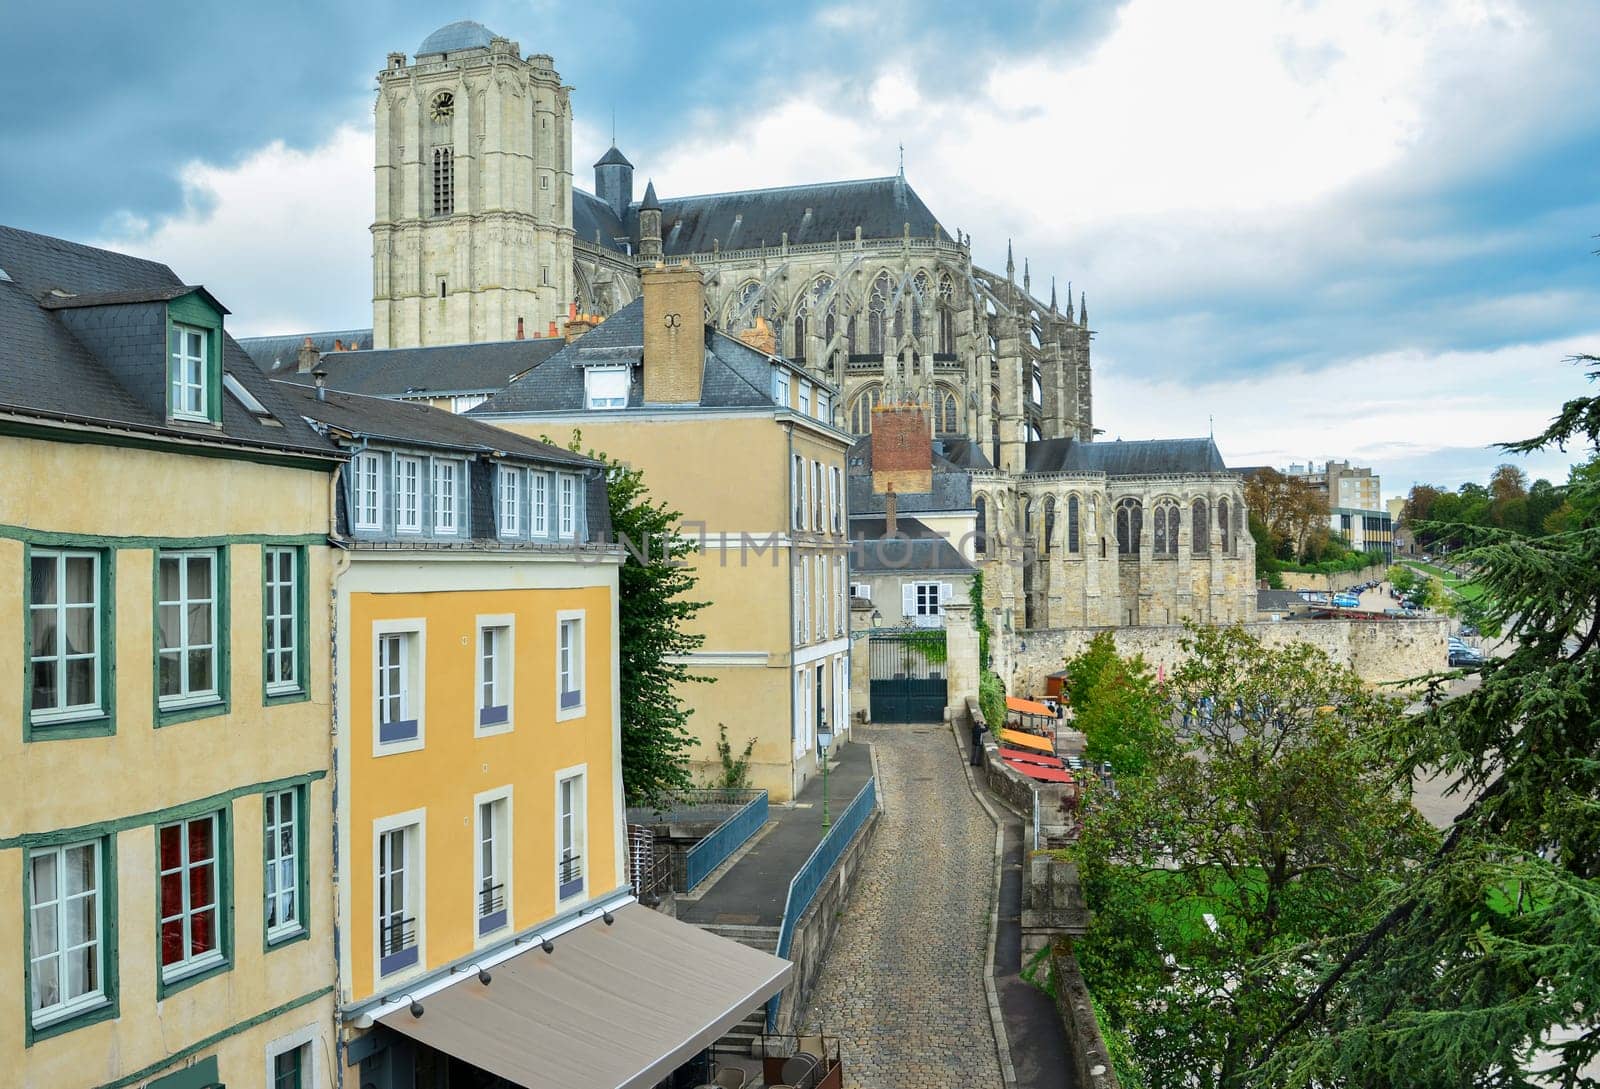 Panoramic view of the medieval town Le mans and the cathedral Saint Julien by Godi